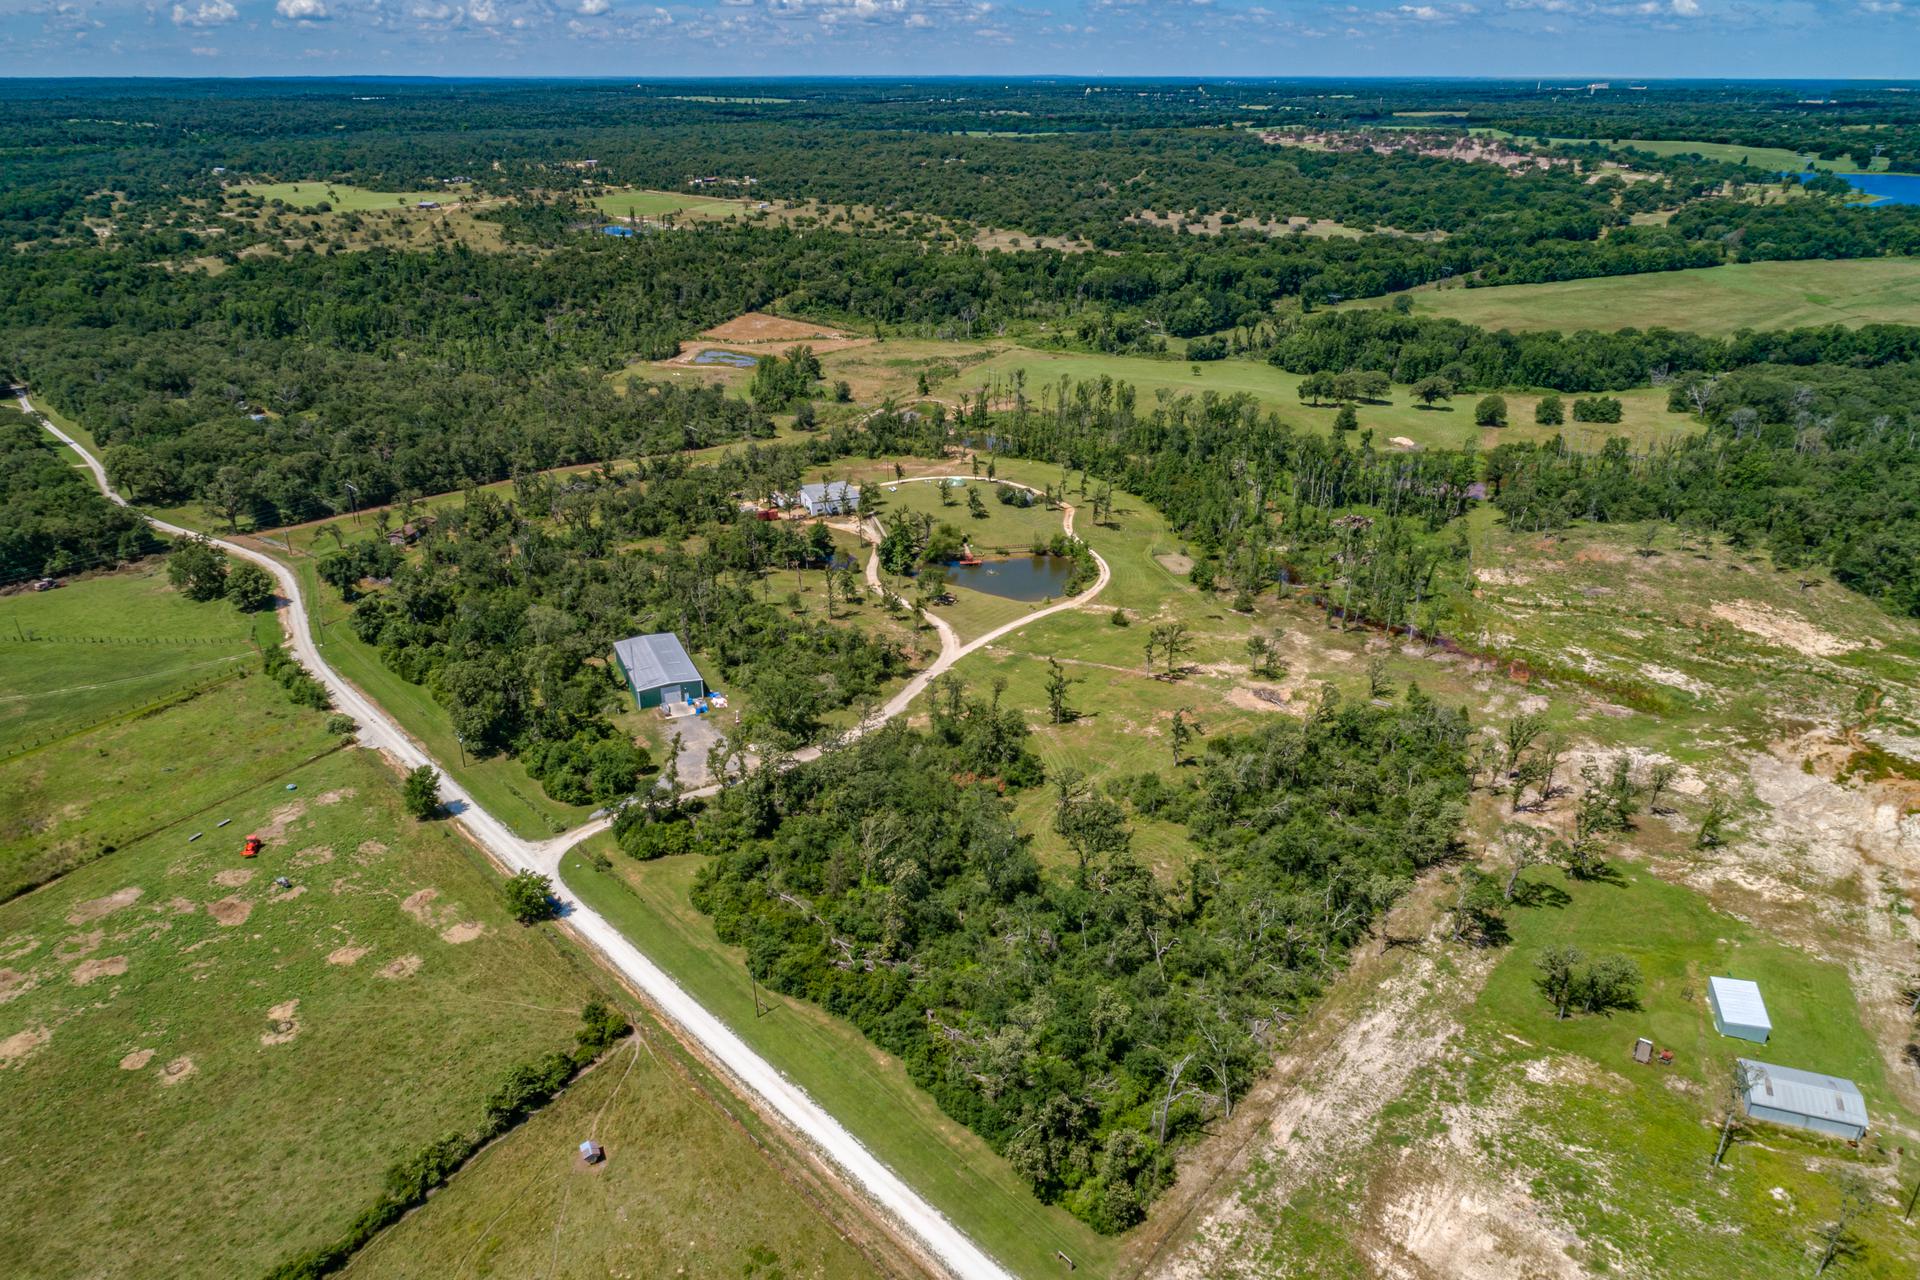 The sprawling 40-acre homesite showing the ponds, garage, warehouses, and outbuilding on the property.